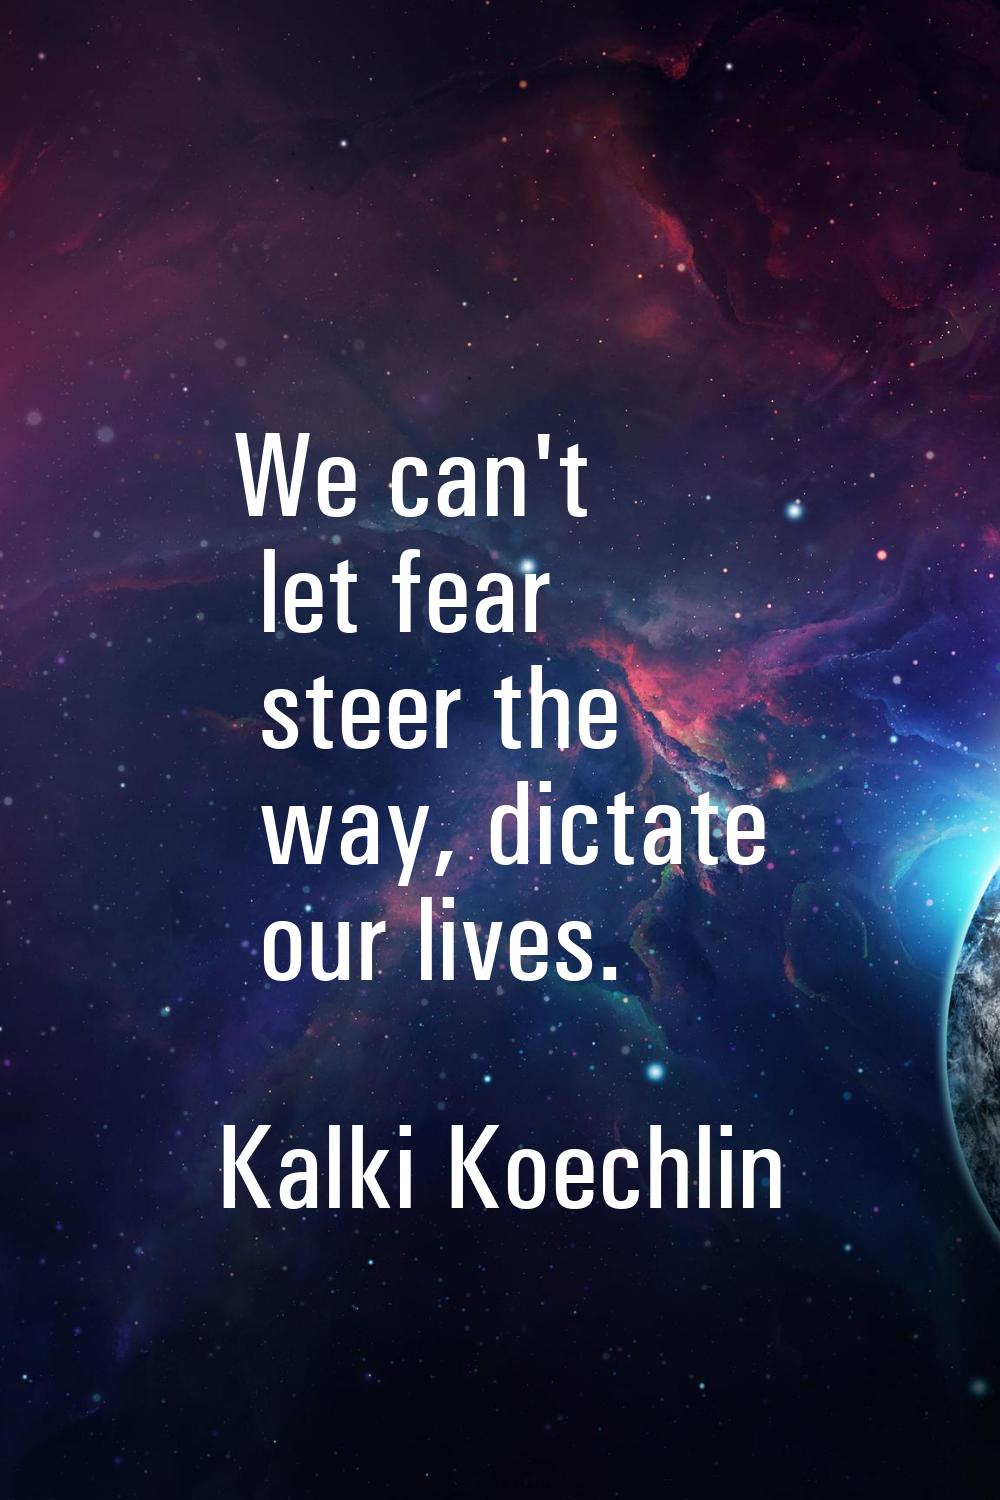 We can't let fear steer the way, dictate our lives.